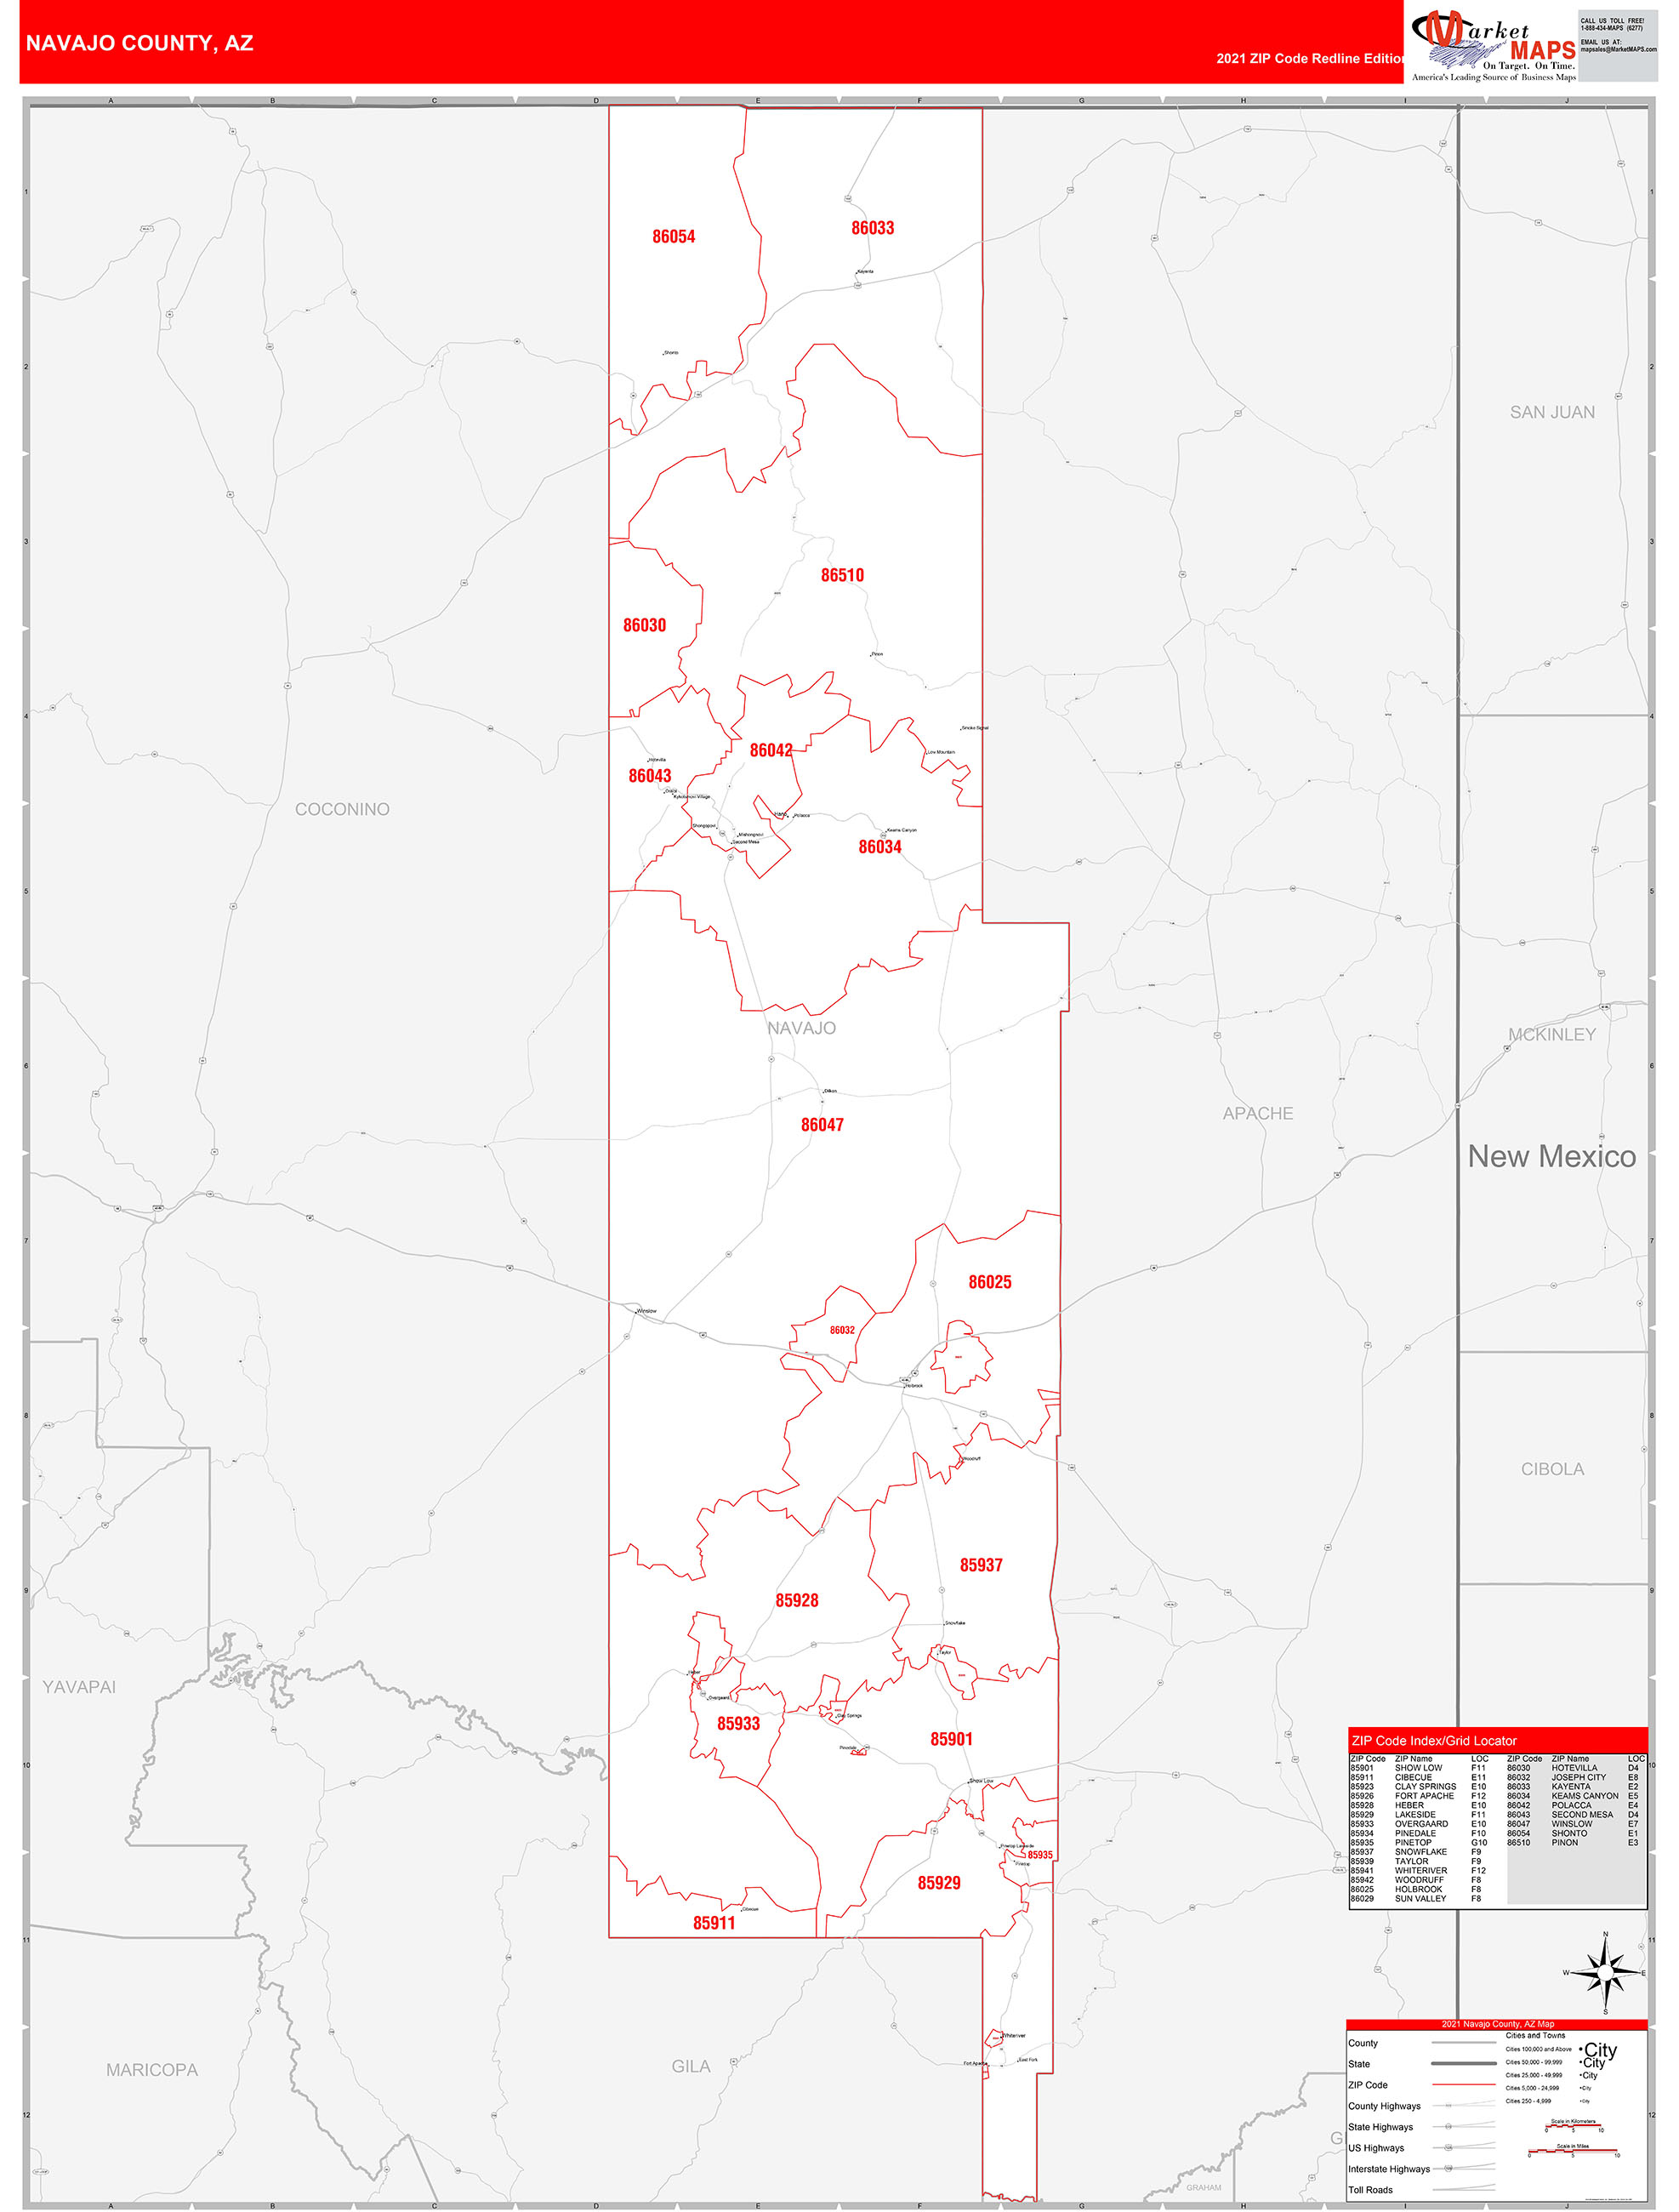 Navajo County, AZ Zip Code Wall Map Red Line Style by MarketMAPS - MapSales